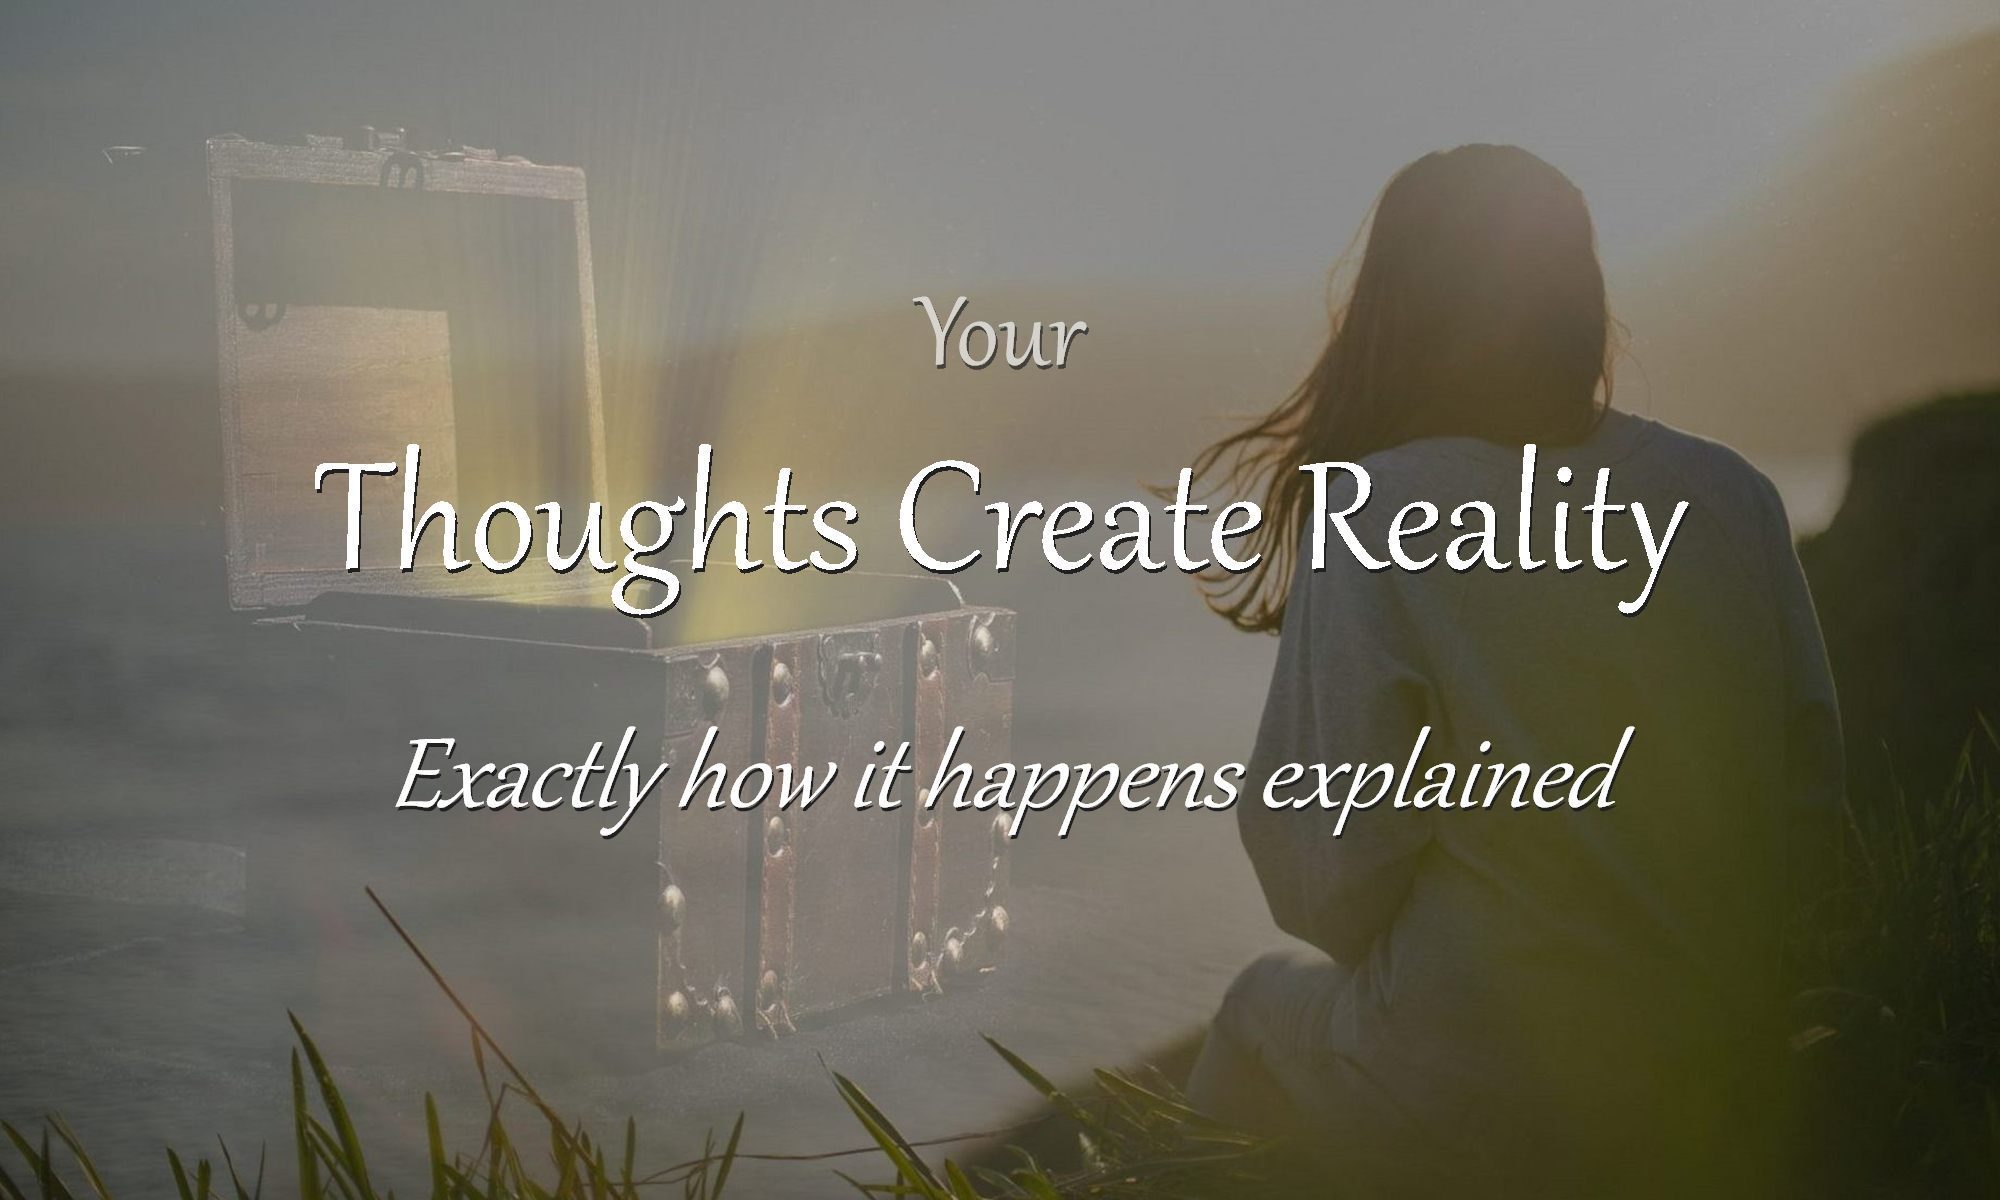 Thoughts form matter and consciousness creates physical reality